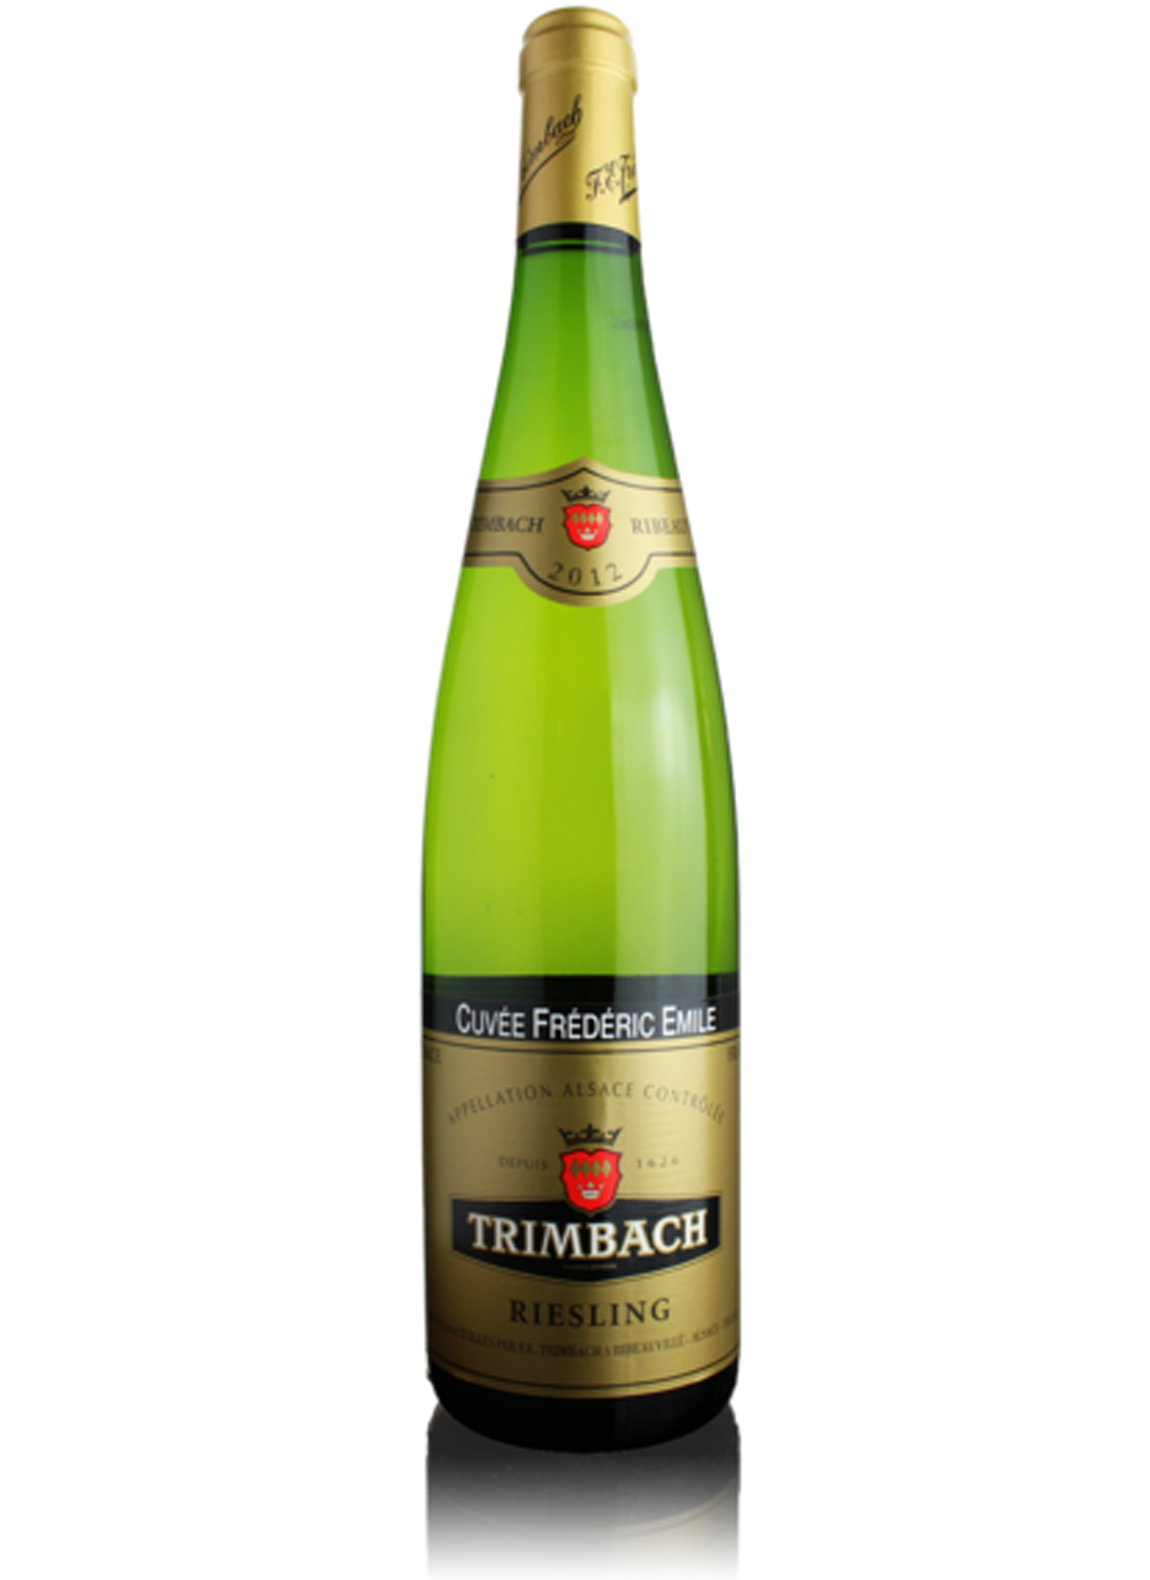 Trimbach Riesling Frederic Emile 2016 Magnum